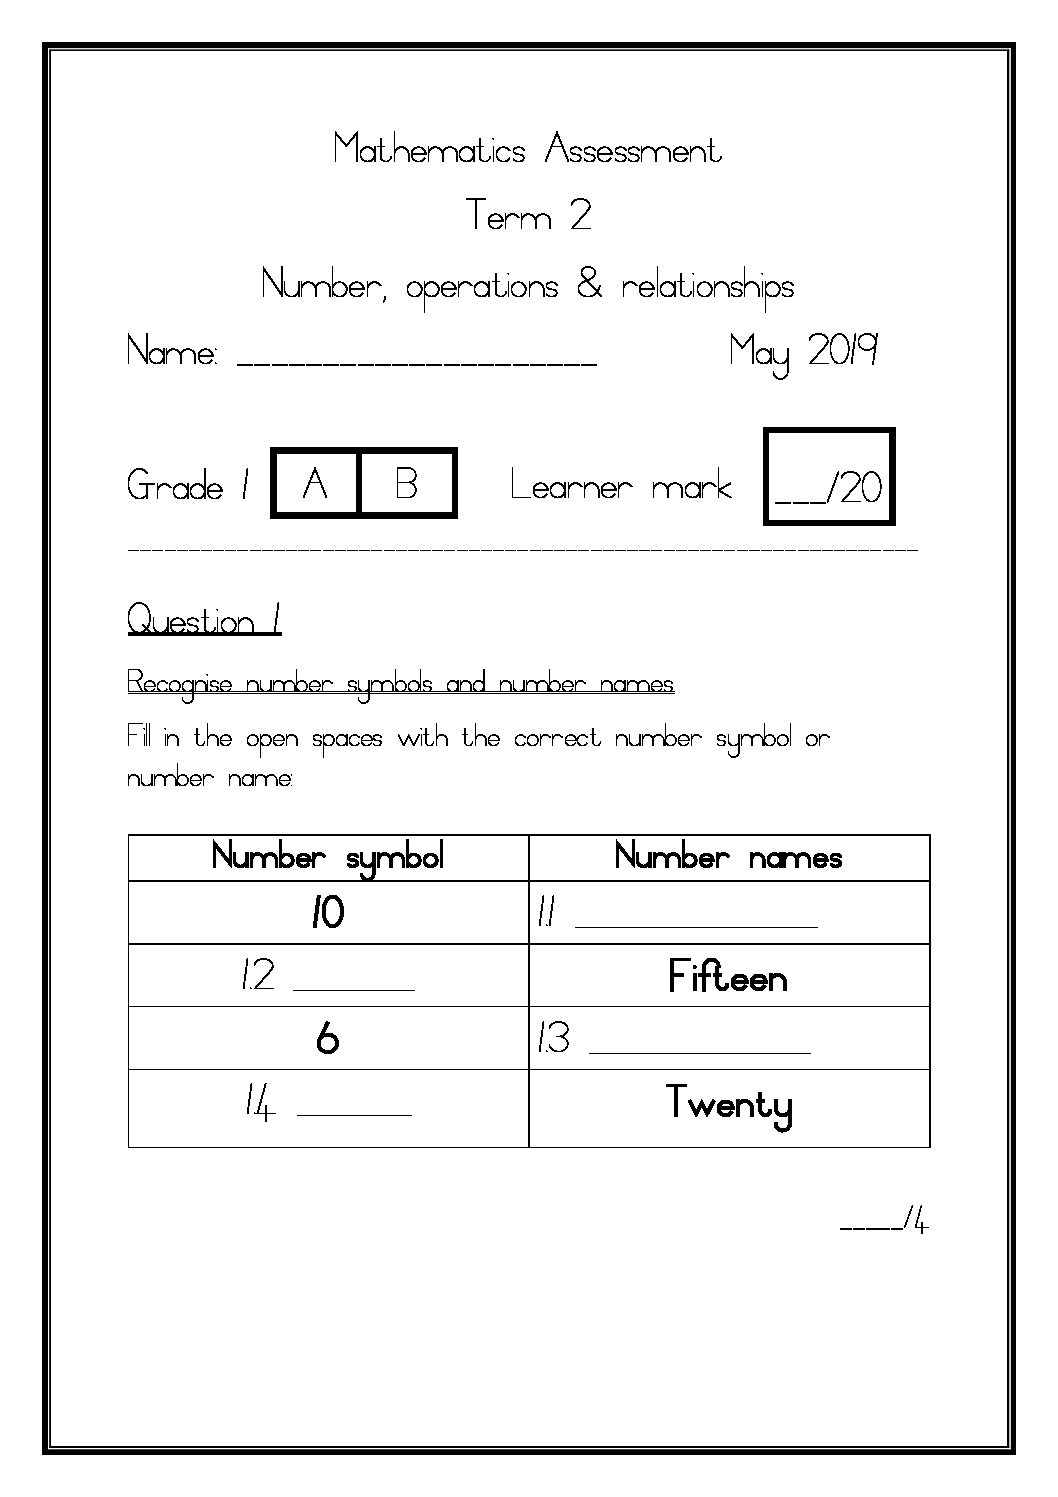 Numbers Operations And Relationships Worksheets